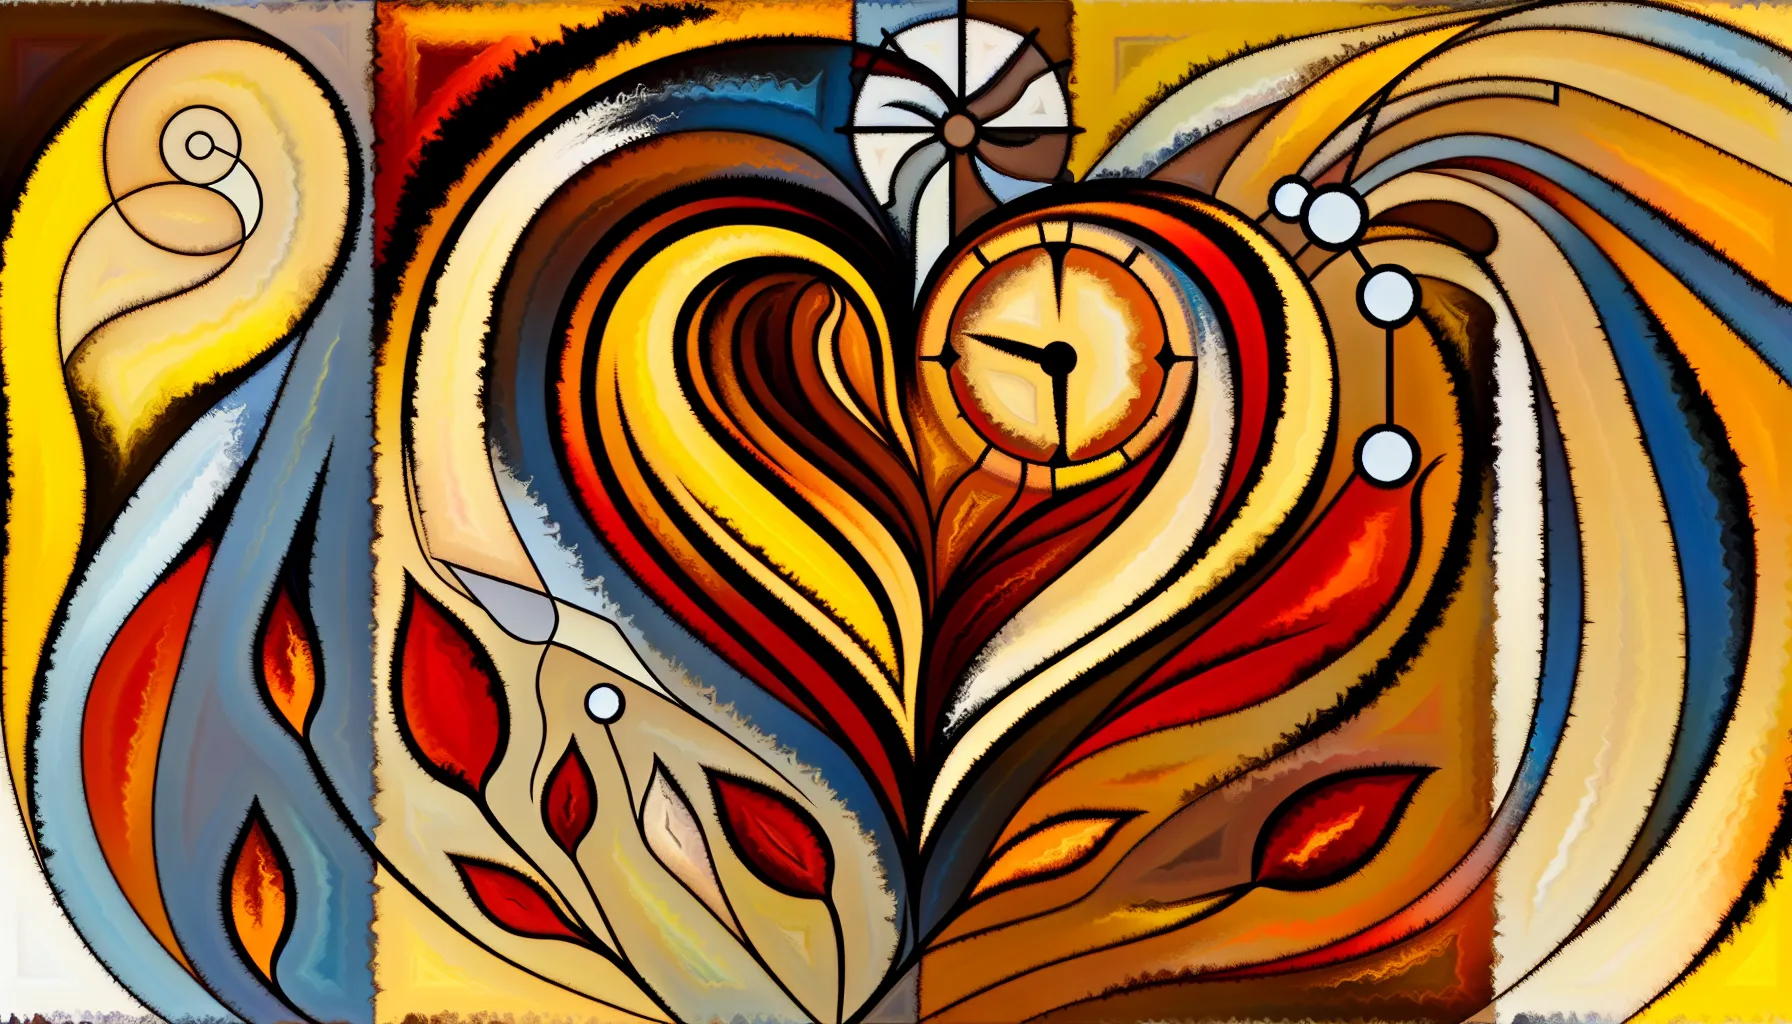 <strong>Time's Embrace:</strong> An abstract heart, cradling the past and nurturing the future, symbolizes the beautiful complexity of dating someone with a history. It's a visual hymn to the intertwined dance of time, healing, and love's rebirth.